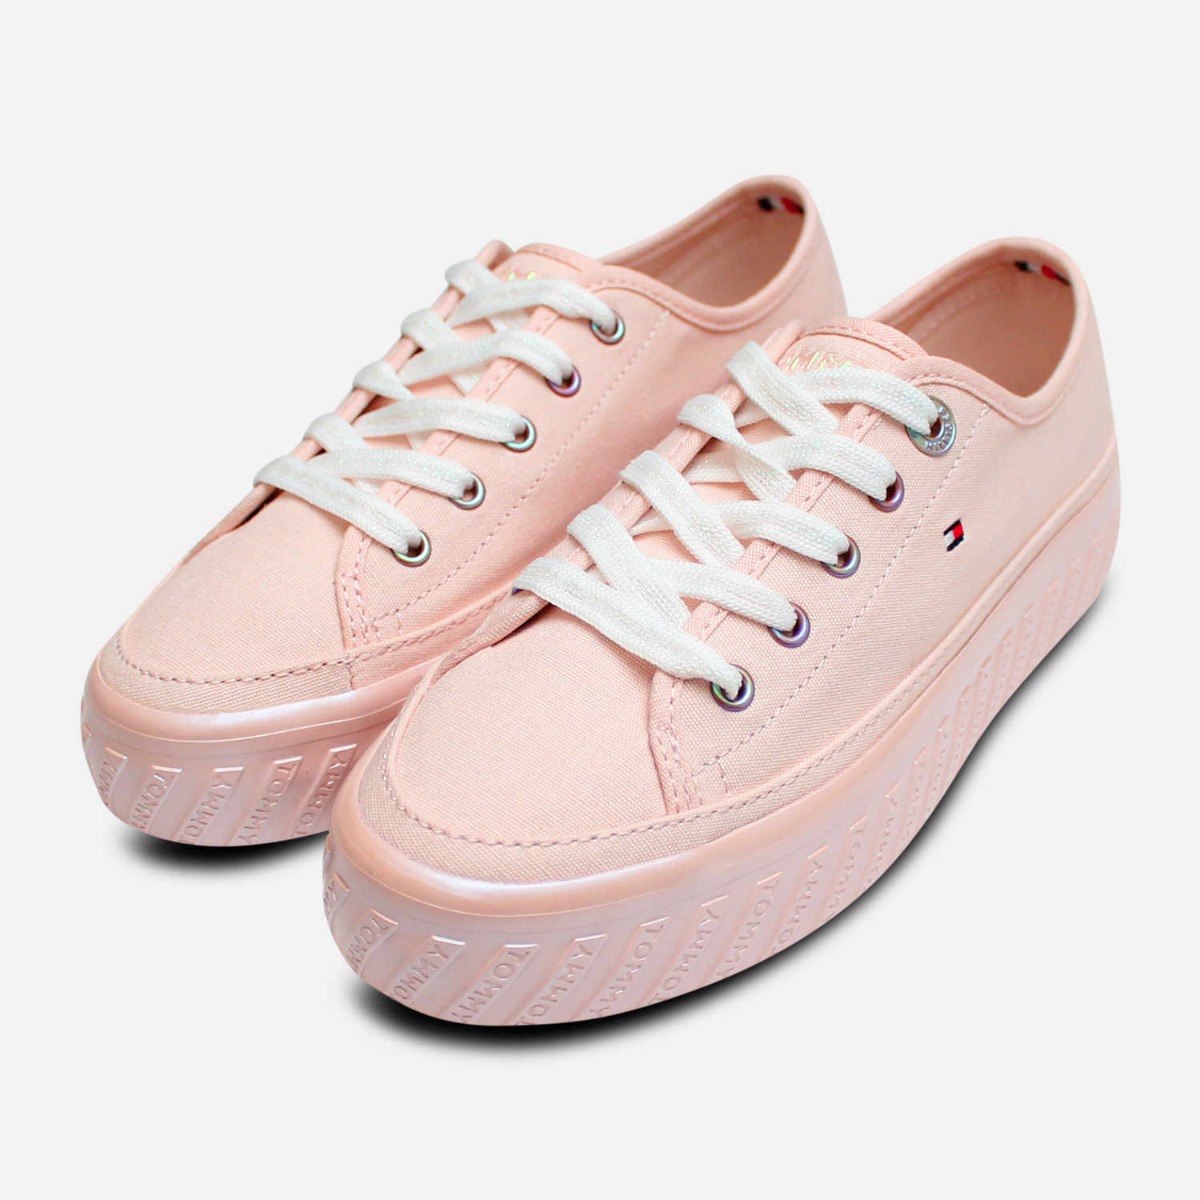 tommy hilfiger sneakers pink